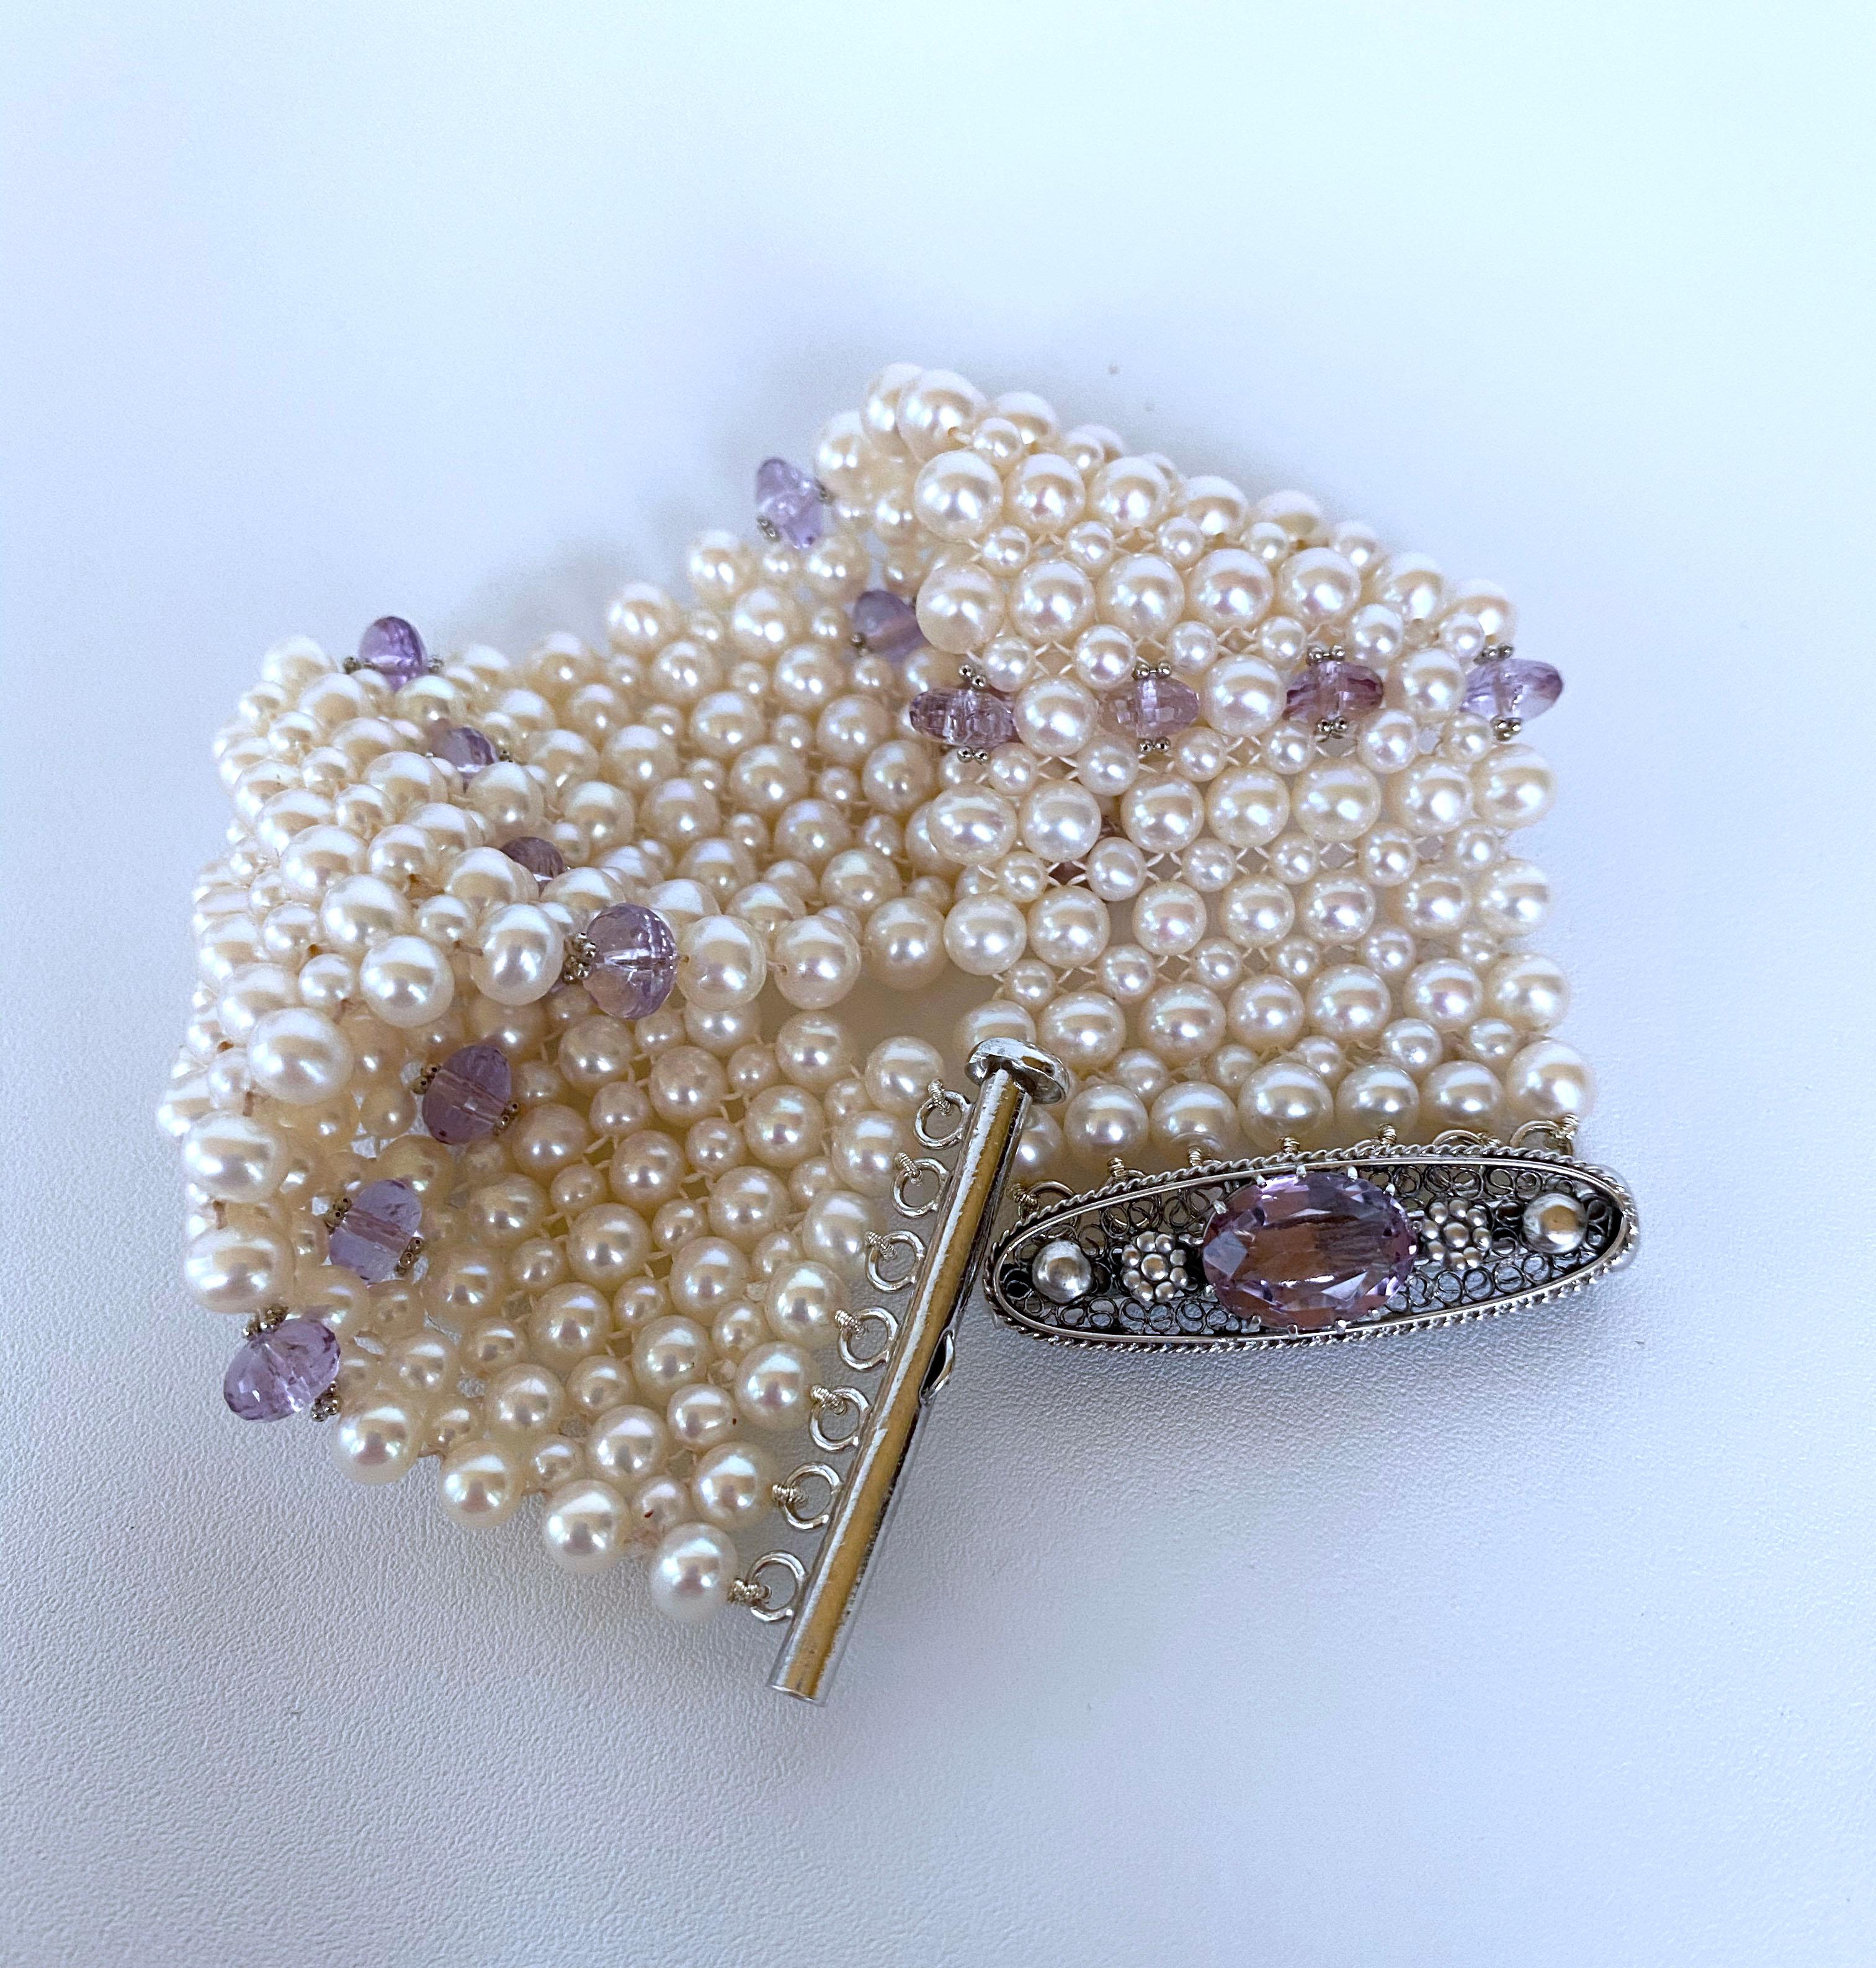 Marina J. Amethyst and Pearl Bracelet with Vintage Centerpiece Clasp and Rhodium For Sale 1